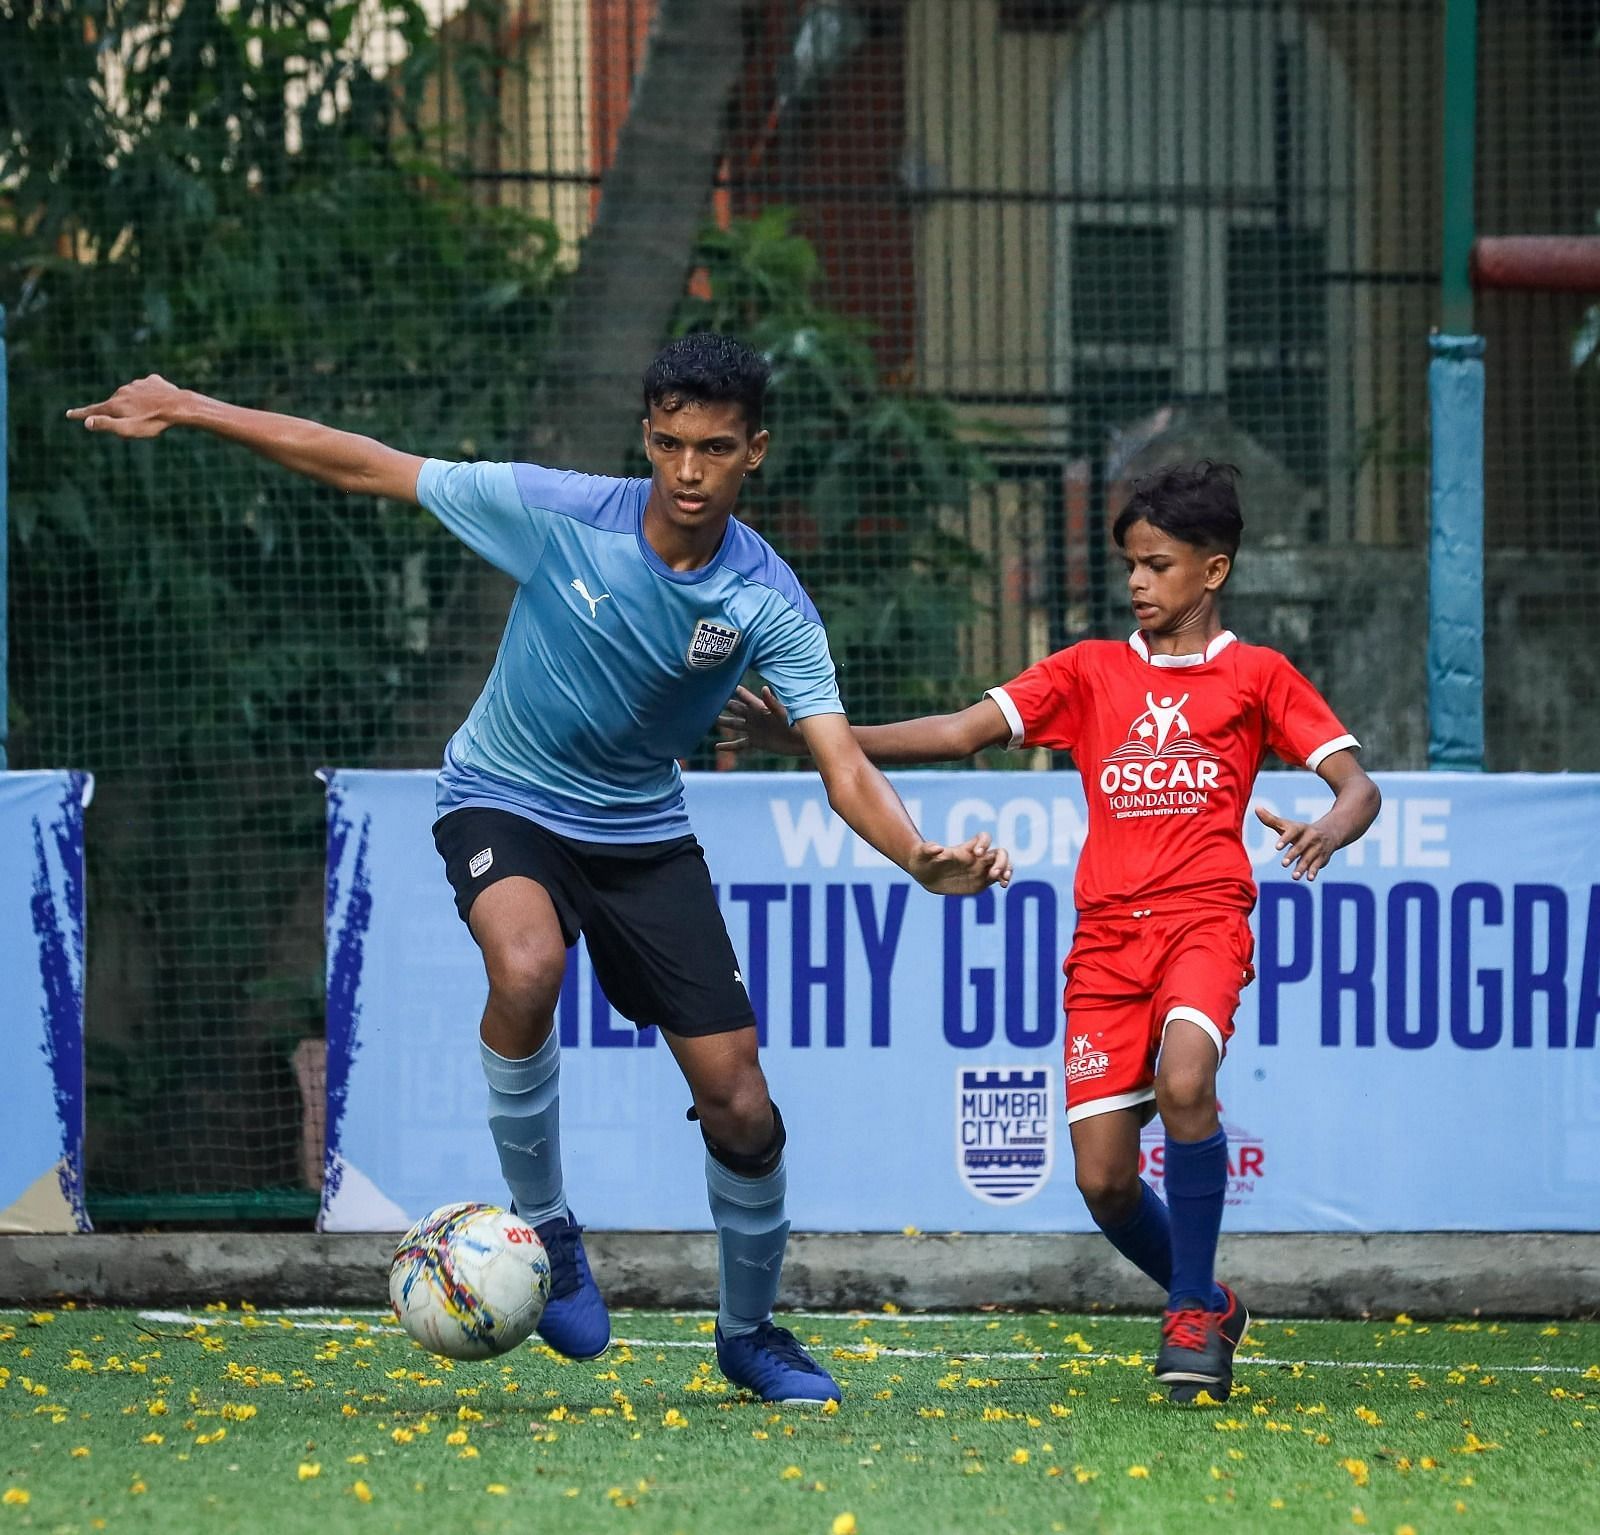 Mumbai City FC players inspiring young athletes during a &#039;Healthy Goals&#039; football session.